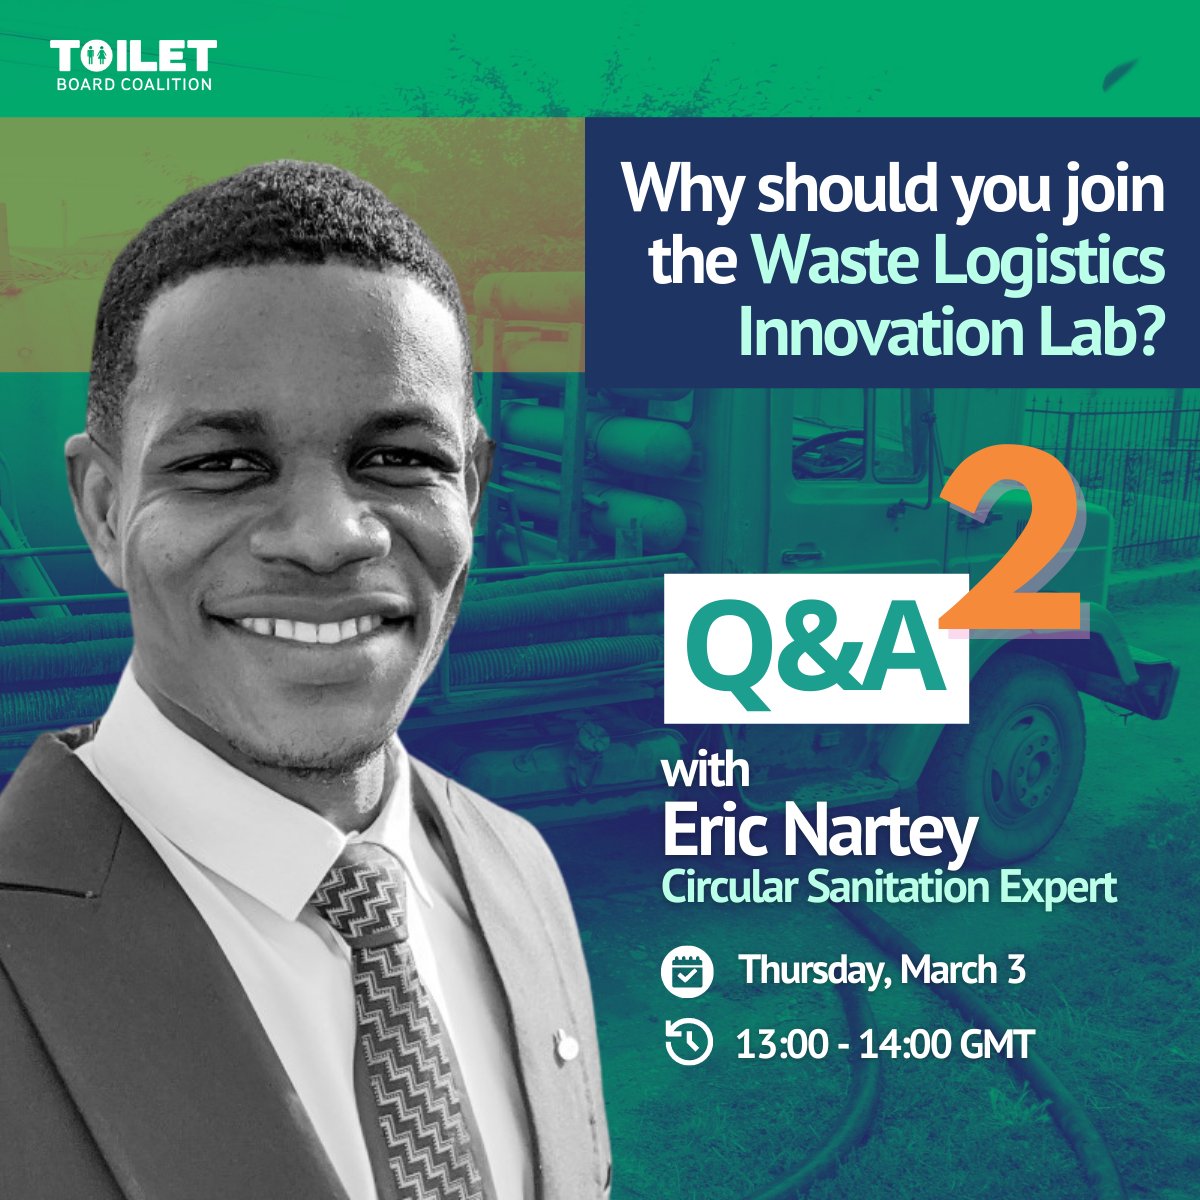 Toilet Board Coalition on X: "🔴 We're going live soon for our second Waste  Logistics Innovation Lab Q&amp;A! if you still haven't registered, click on  the link below 👇 REGISTER HERE ➡️